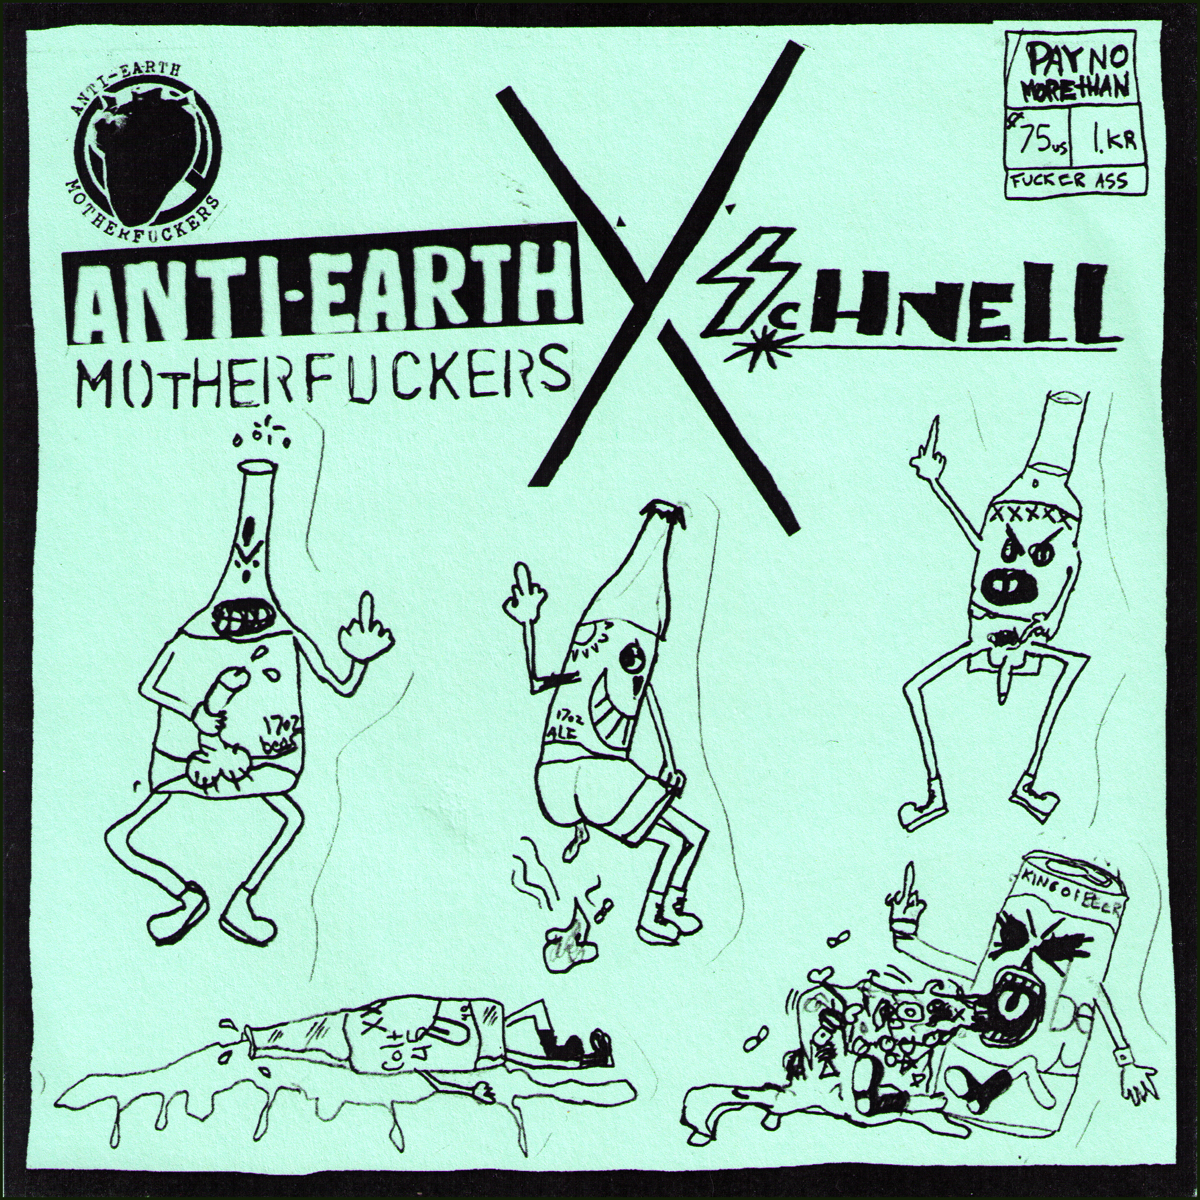 Anti-Earth Motherfuckers / Schnell- Split 7” ~NUMBERED OUT OF 125!